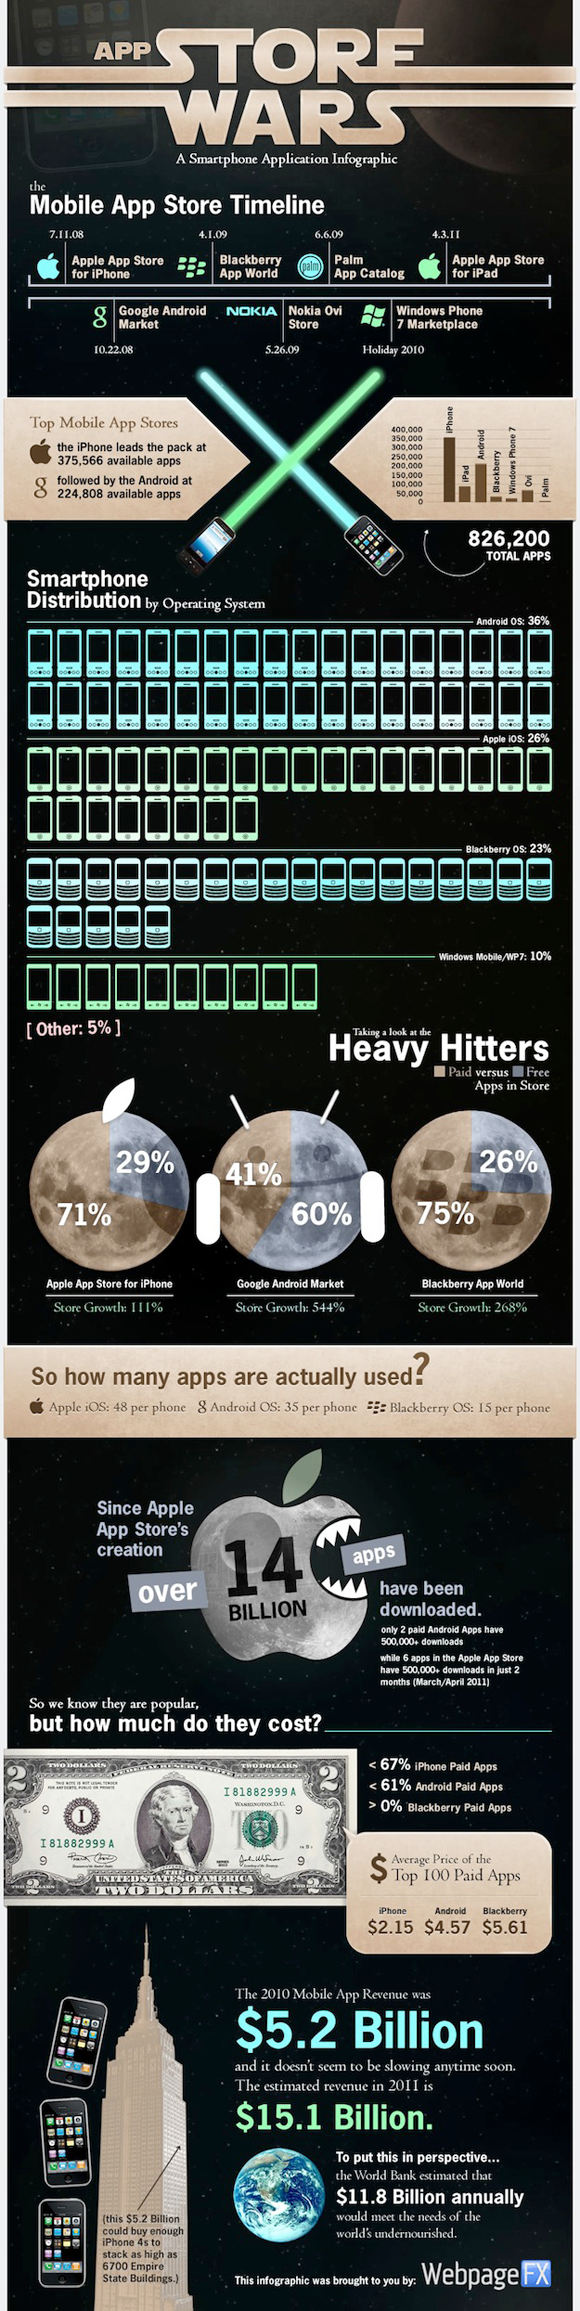 IOS Apps vs. Android Apps